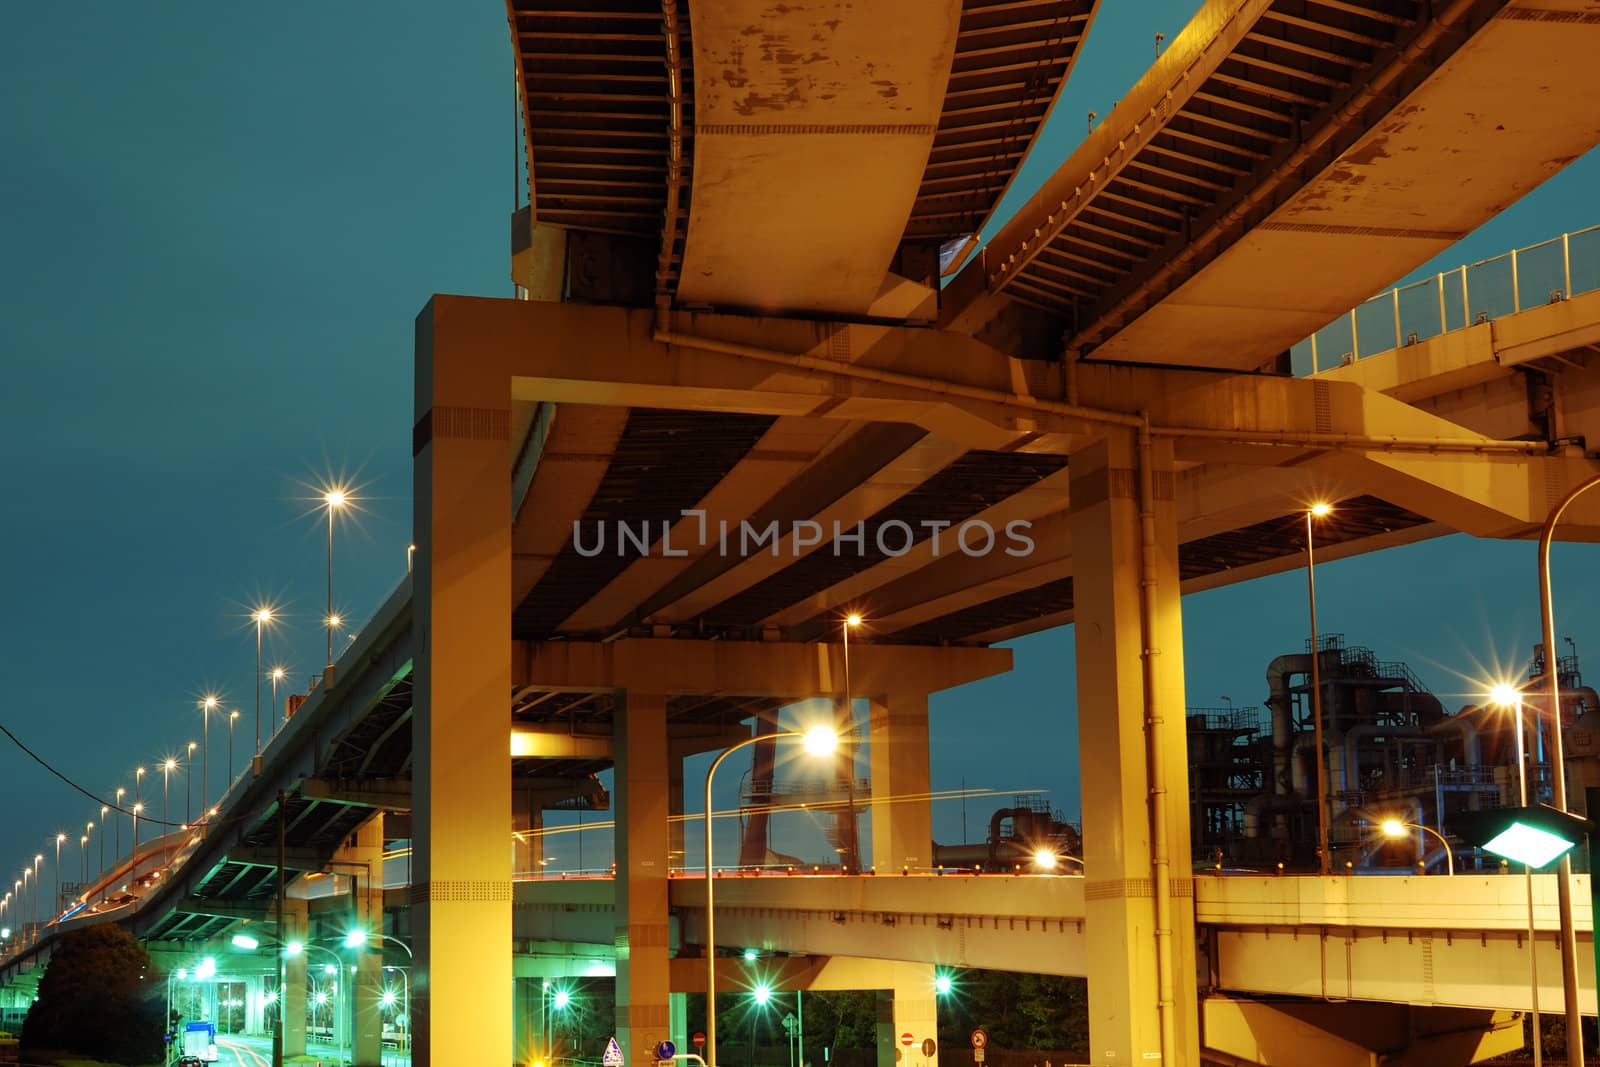 huge highway structure with column support in Tokyo, Japan